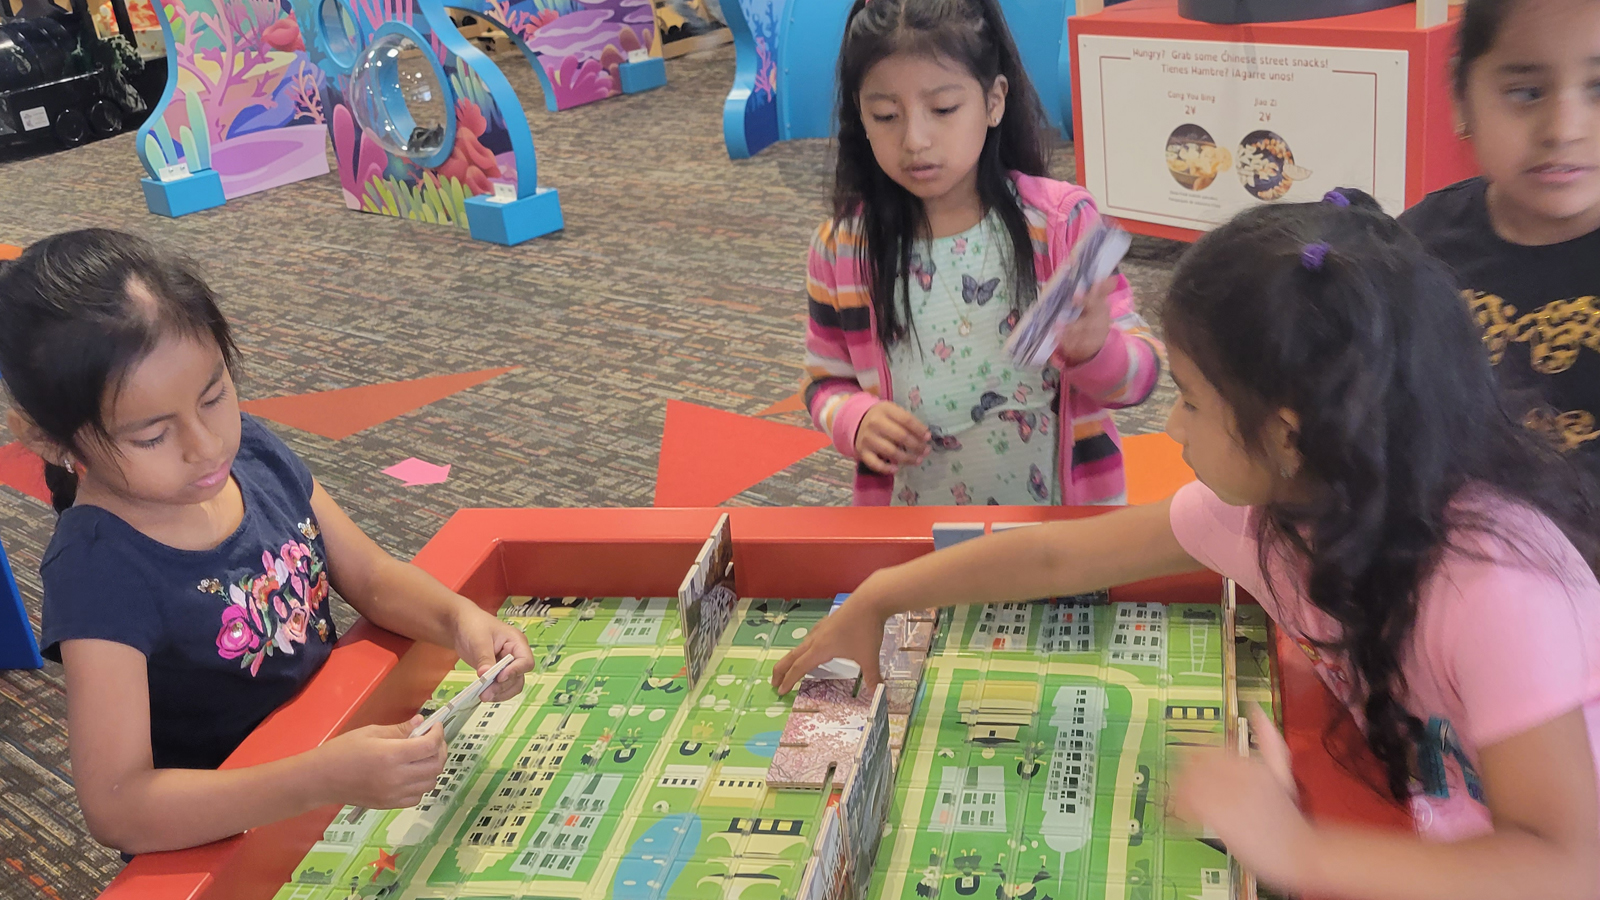 Four young girls playing at a table with an interactive board game